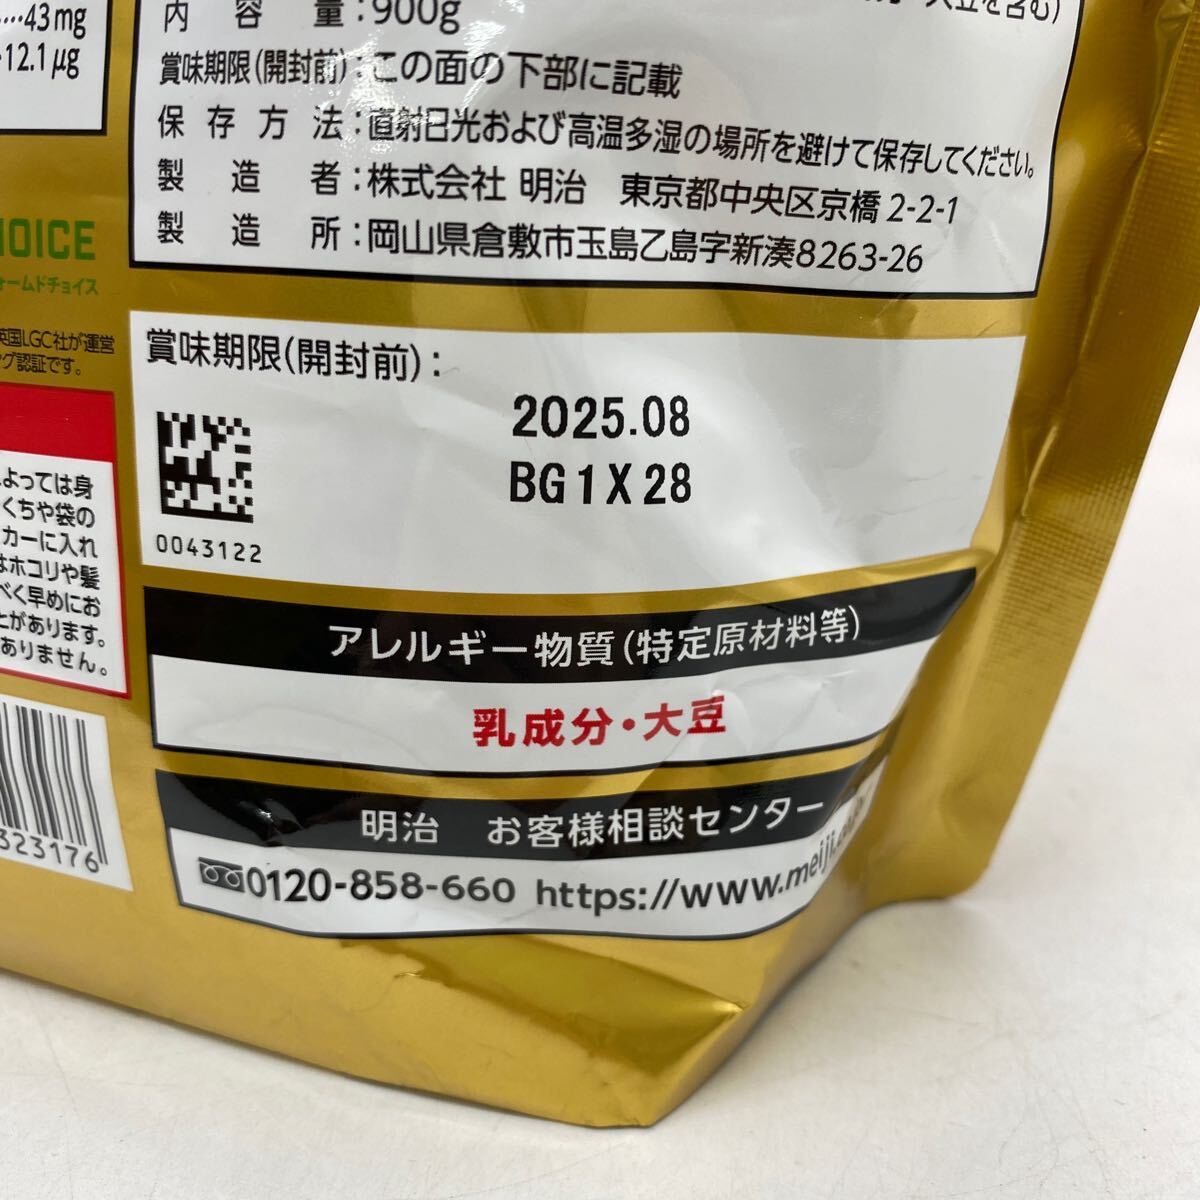 A0958 unopened health food The bus advanced whey protein 900g × 3 sack cocoa taste SAVAS ADVANCED WHEY PROTEIN